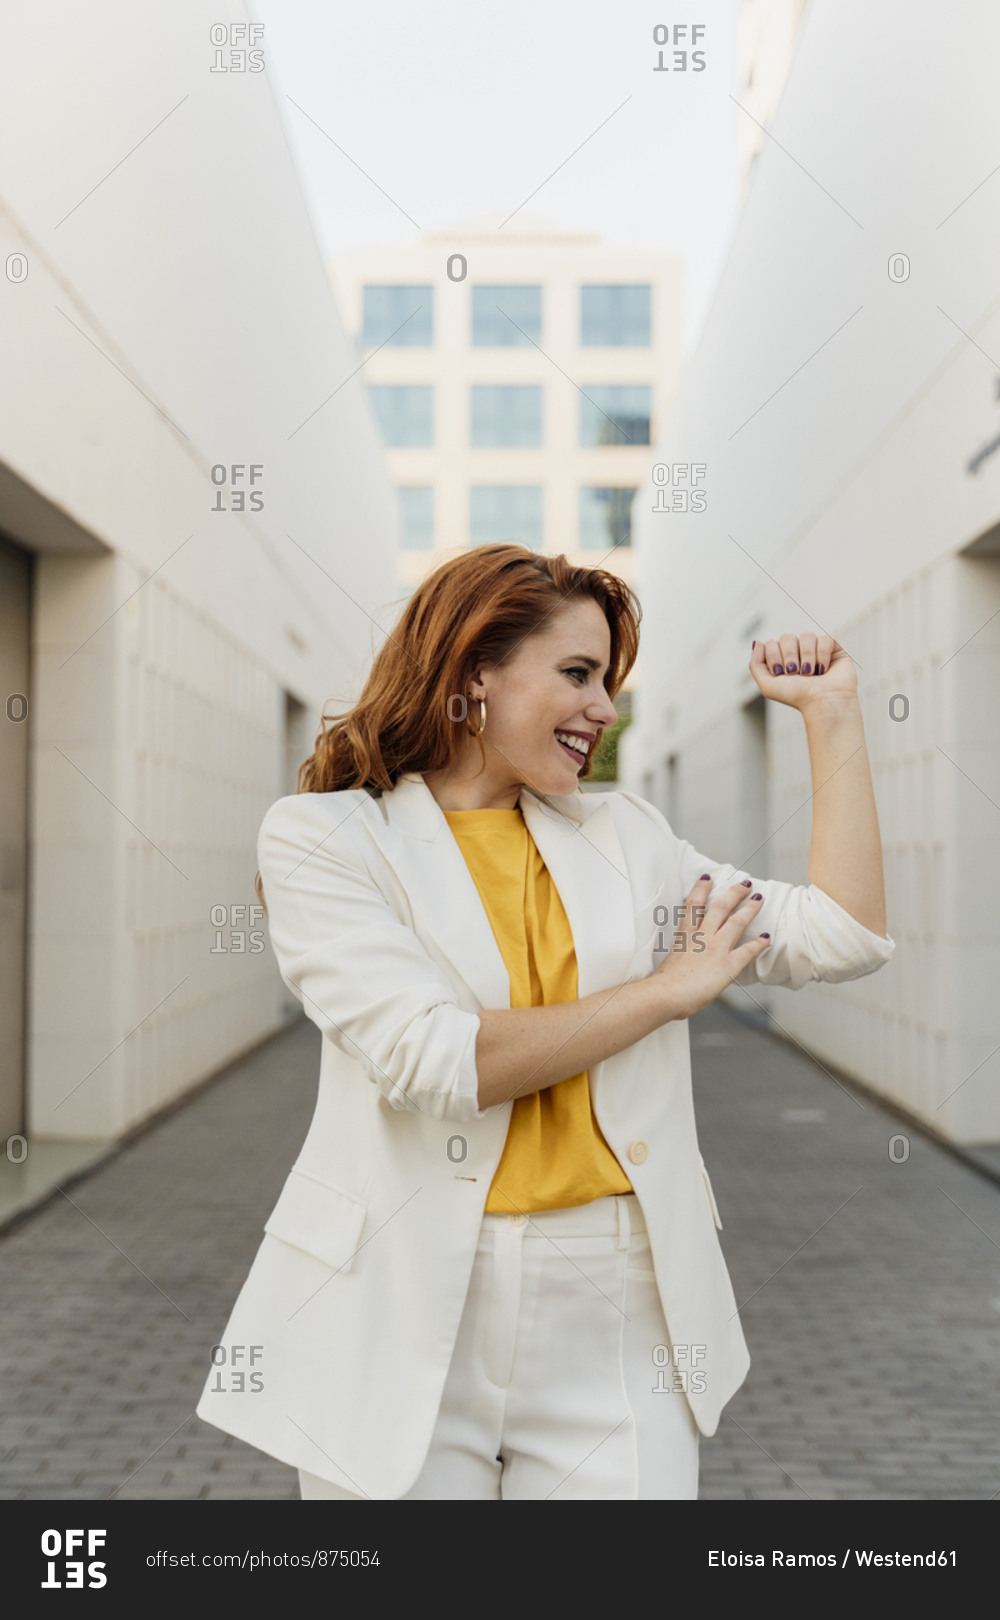 Energetic businesswoman in white pant suit- flexing her muscles